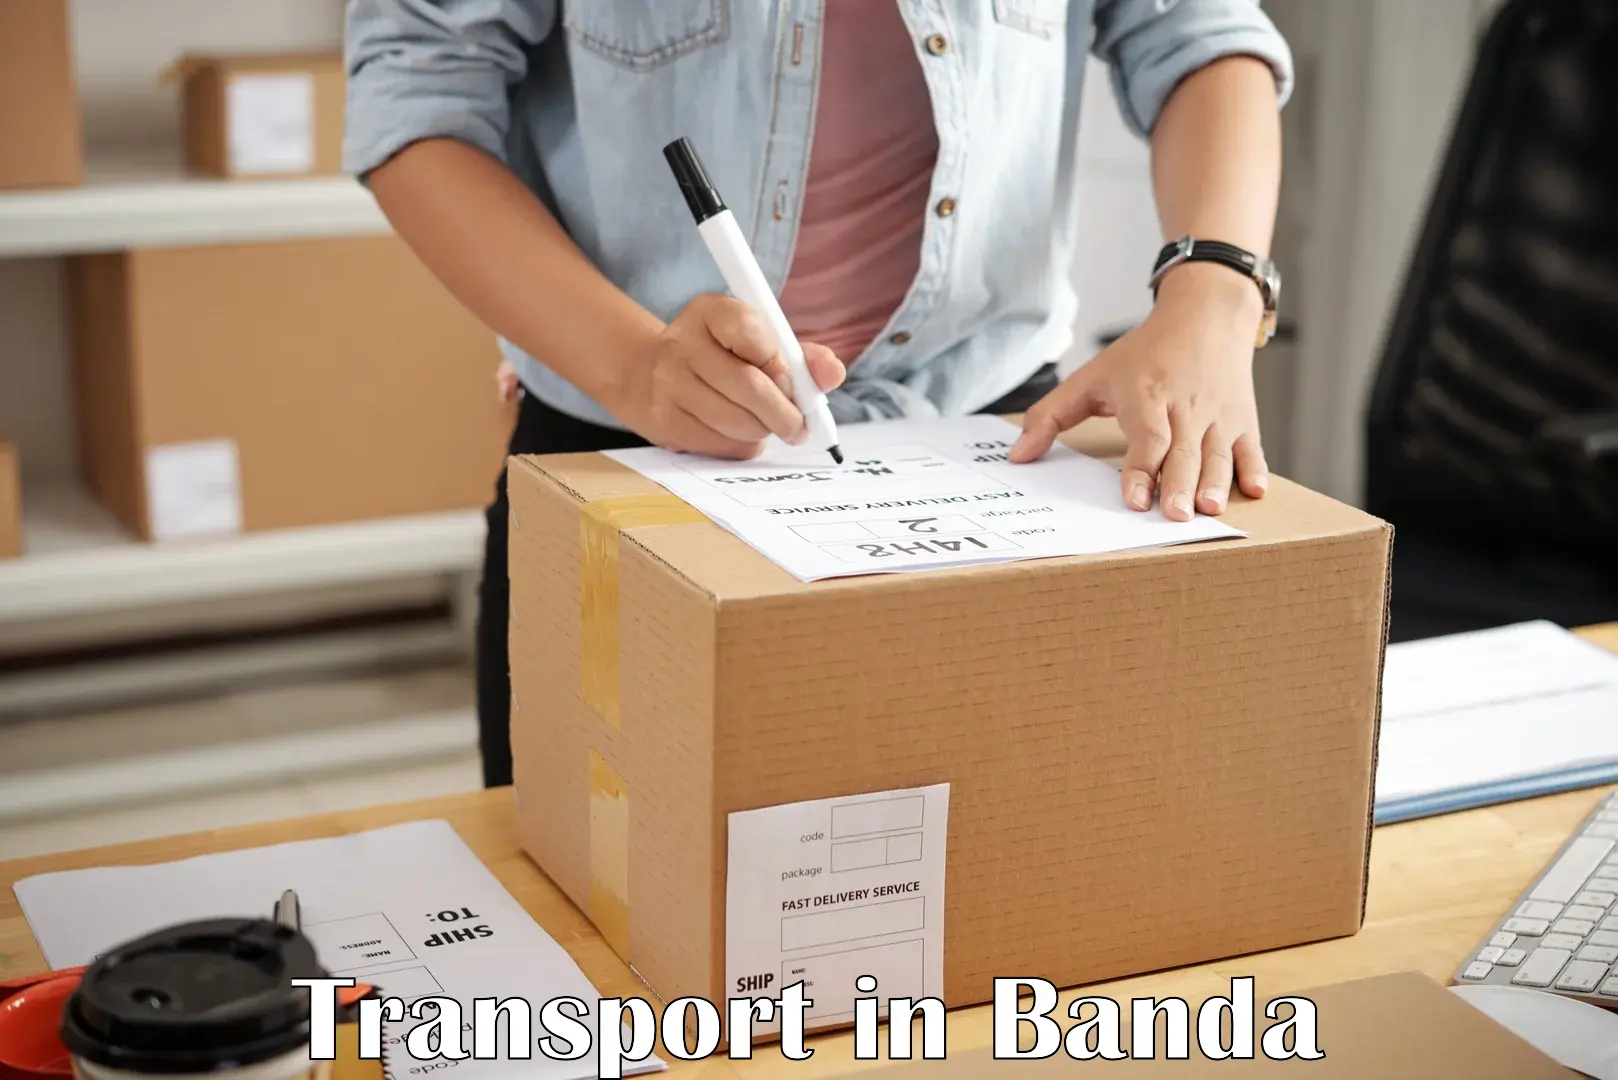 Two wheeler transport services in Banda